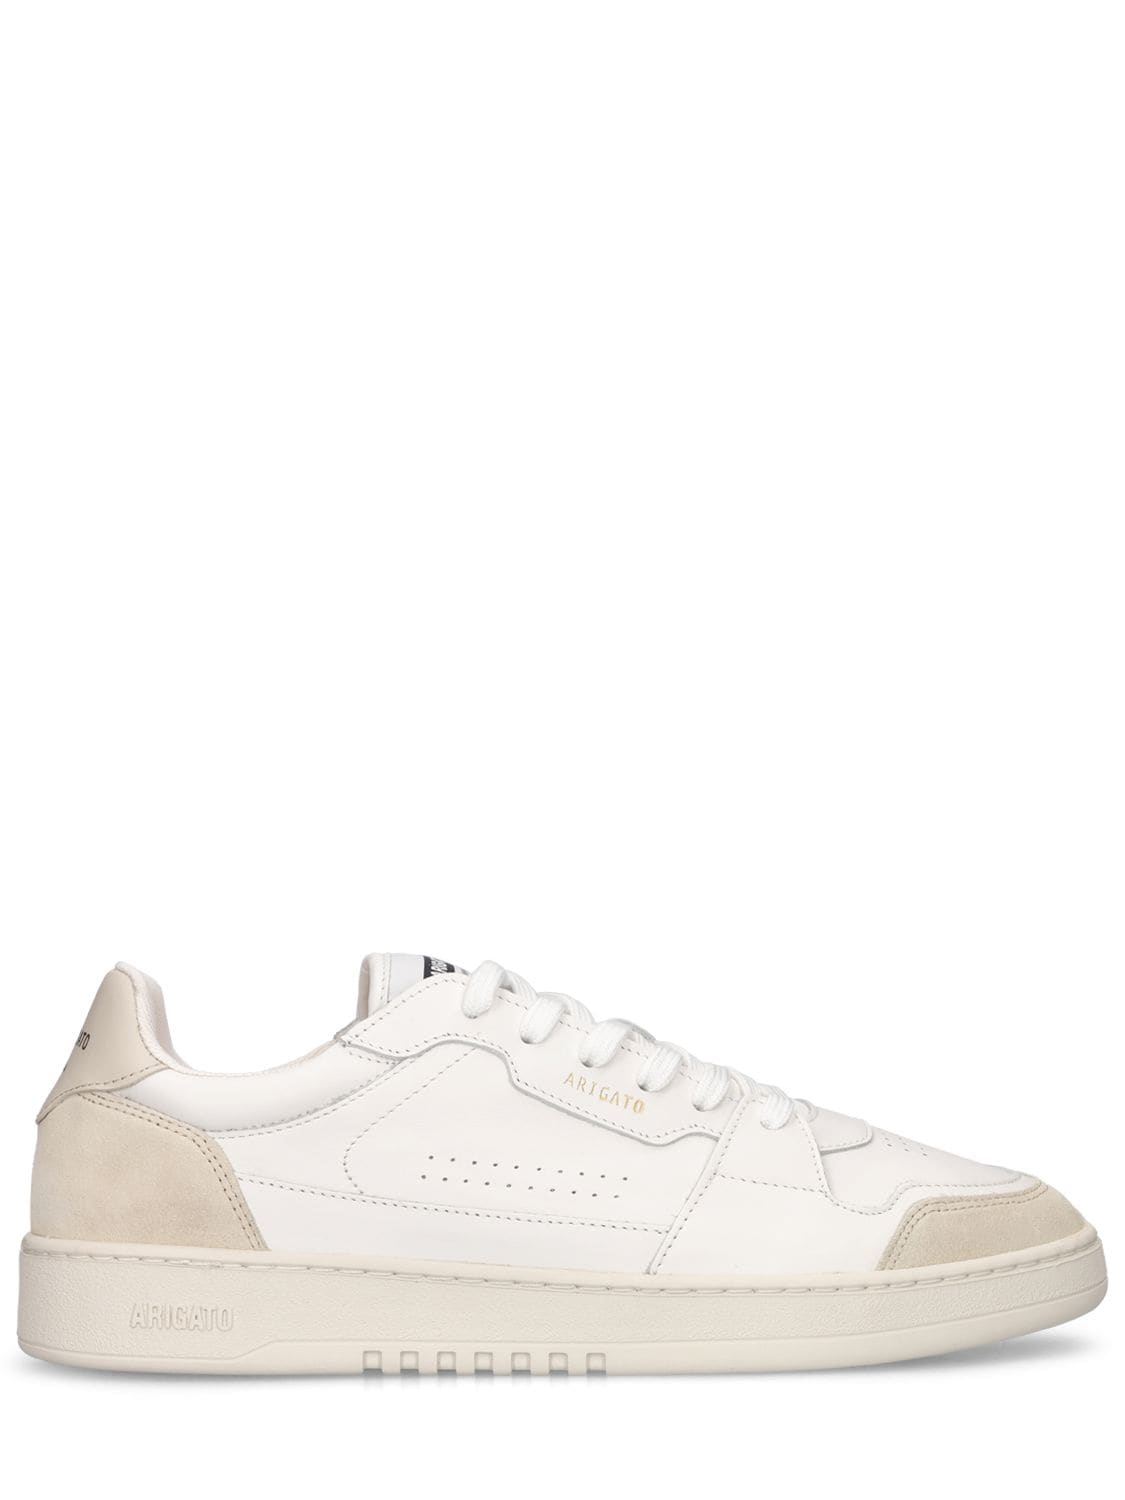 Dice Low Leather Sneakers – MEN > SHOES > SNEAKERS